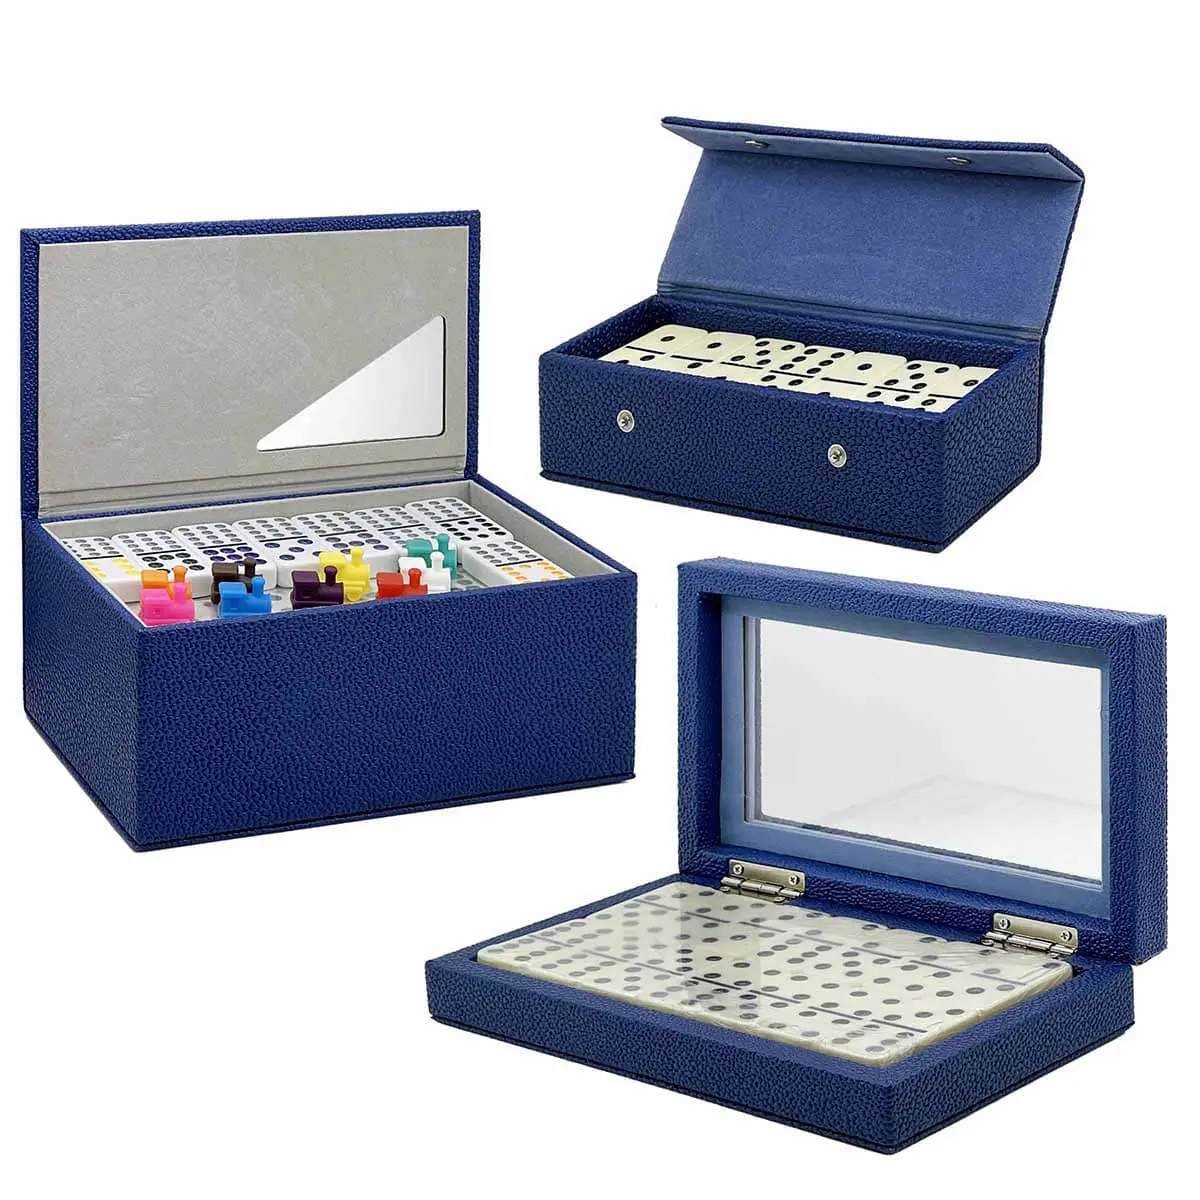 Classic Dominoes Set Pebbled Leatherette Box Collection